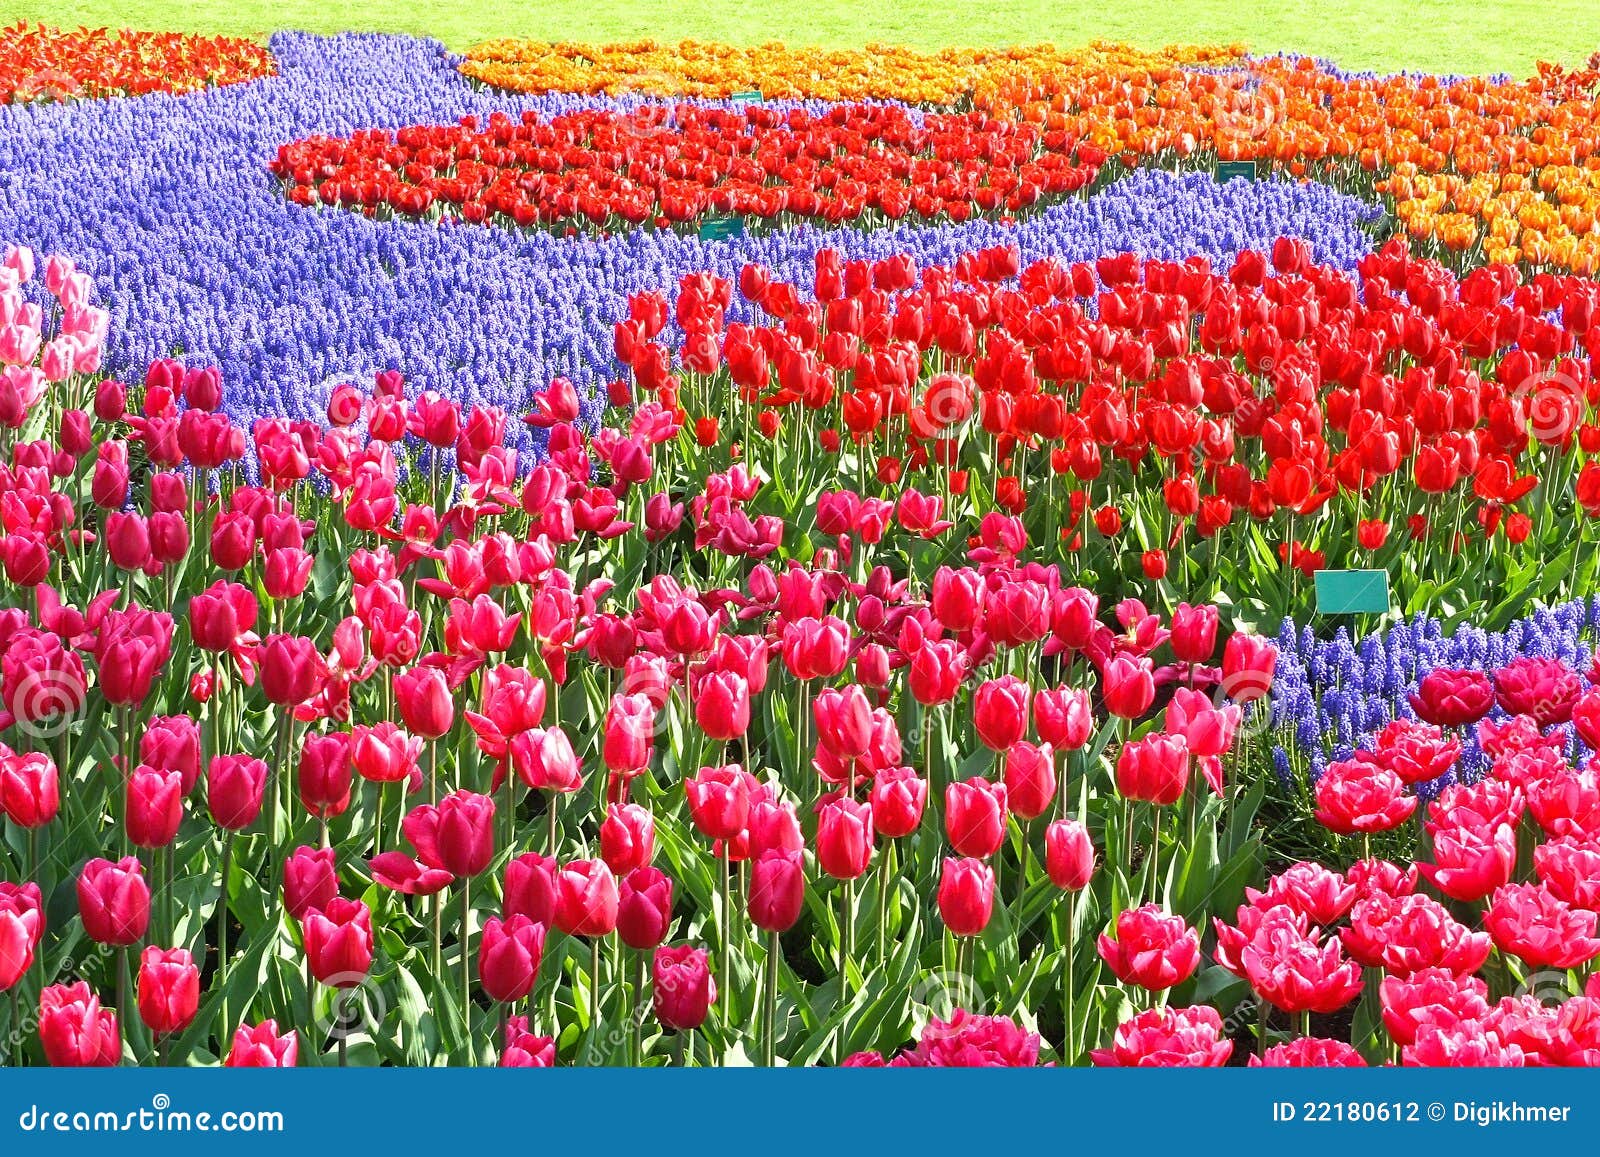 colorful tulips garden patchwork